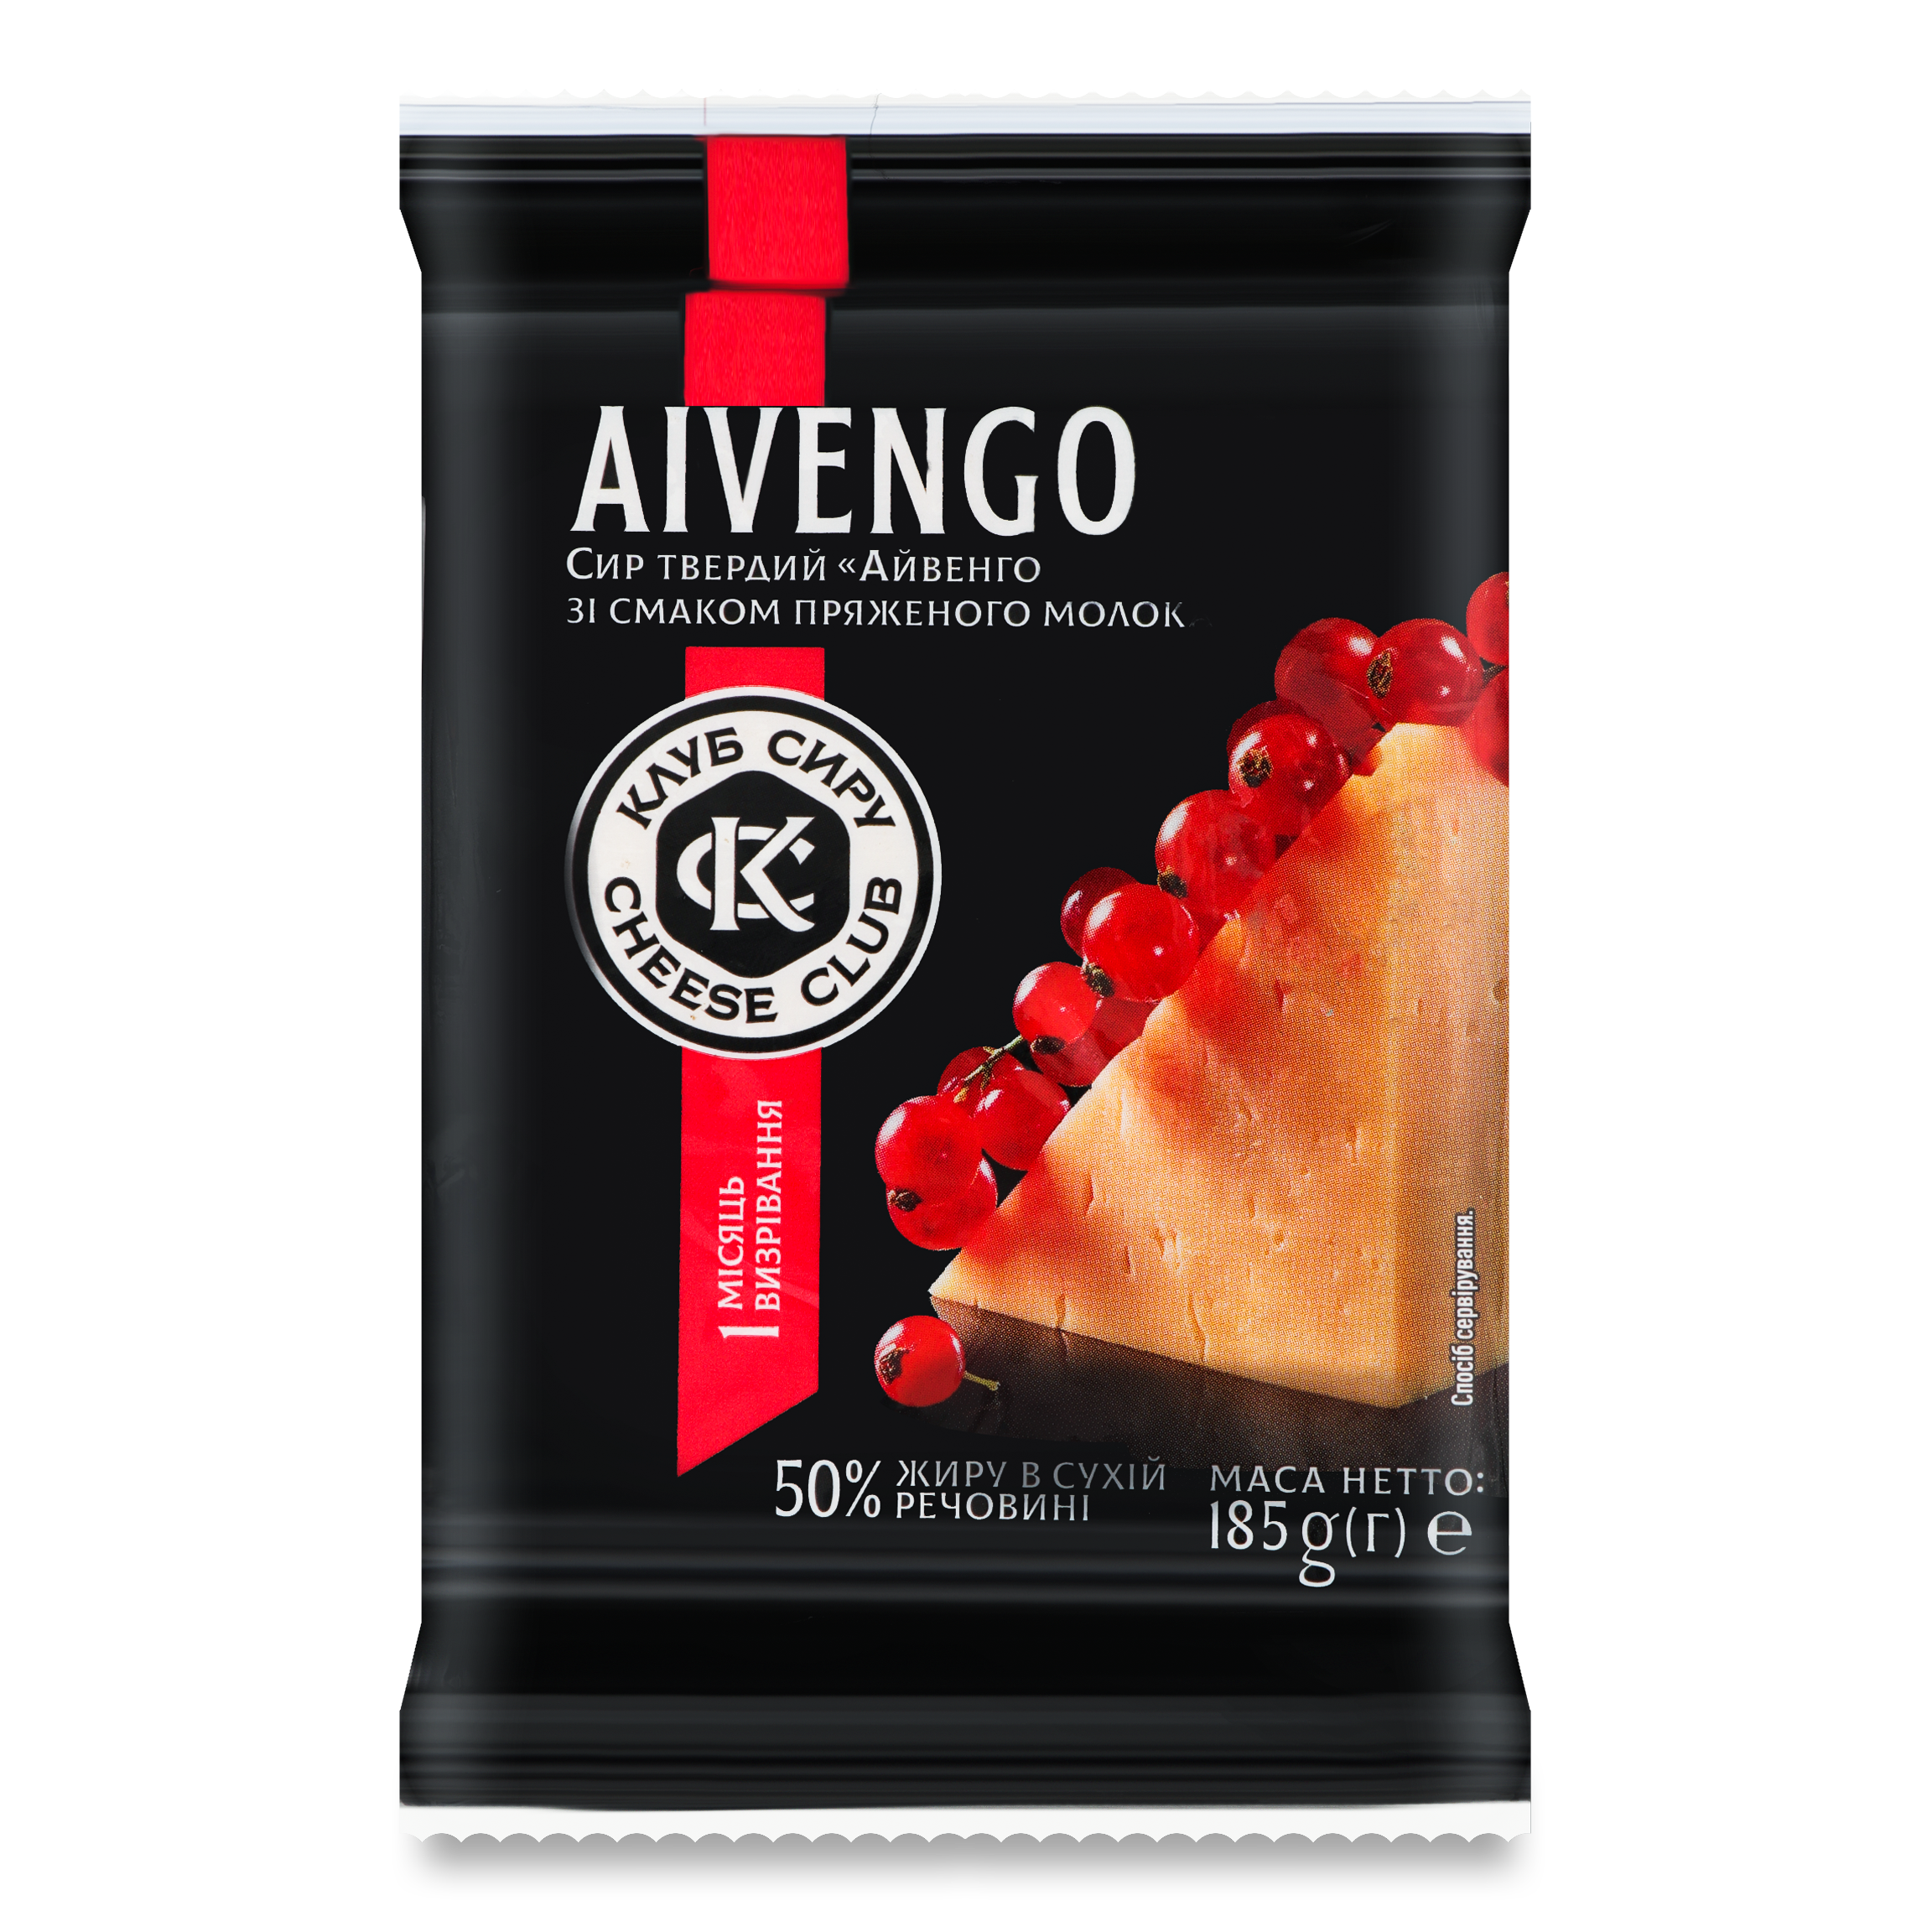 Cheese Club Aivengo Hard Cheese with Baked Milk Flavor 50% 185g